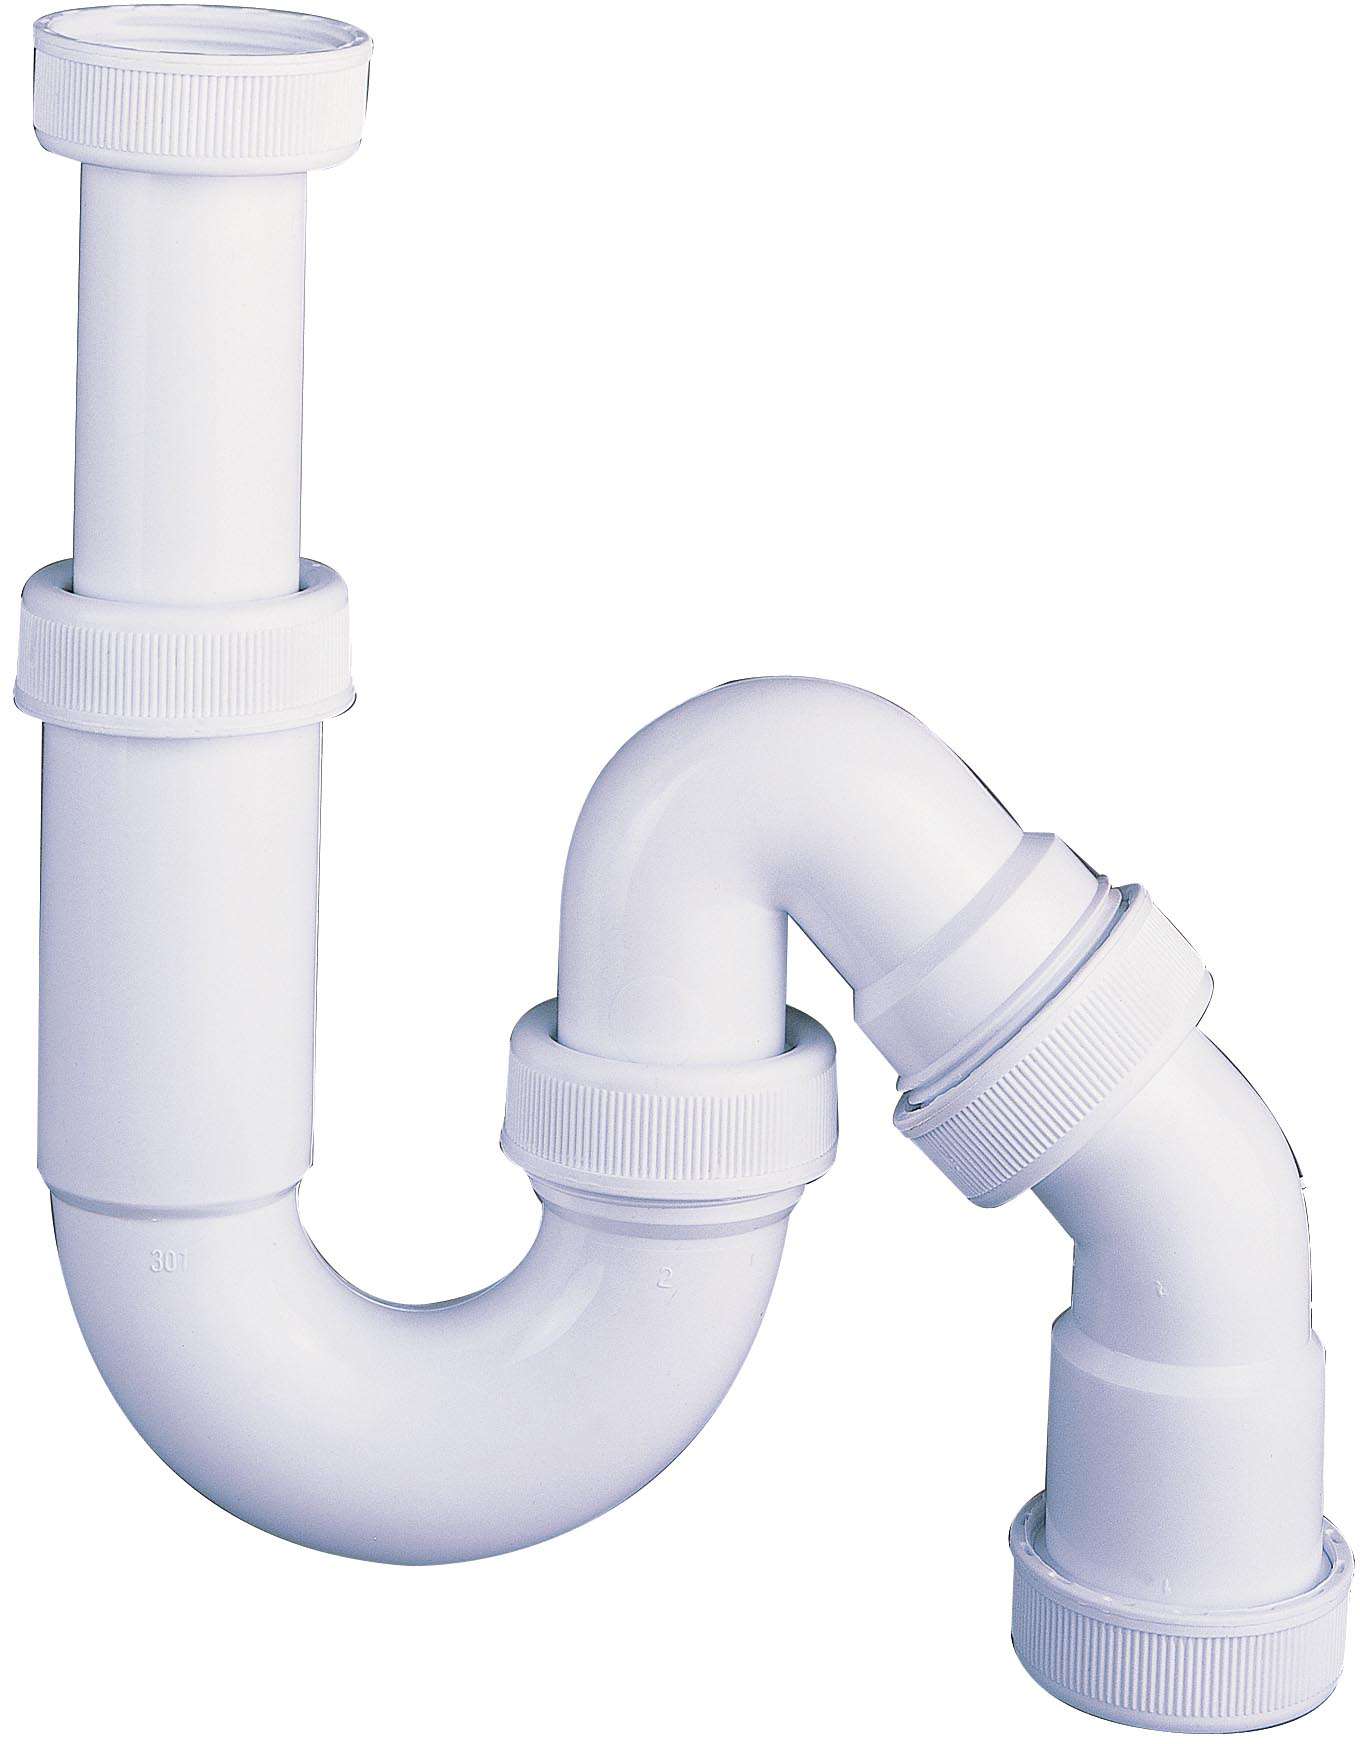 Adjustable "S" shaped siphon - 0201091